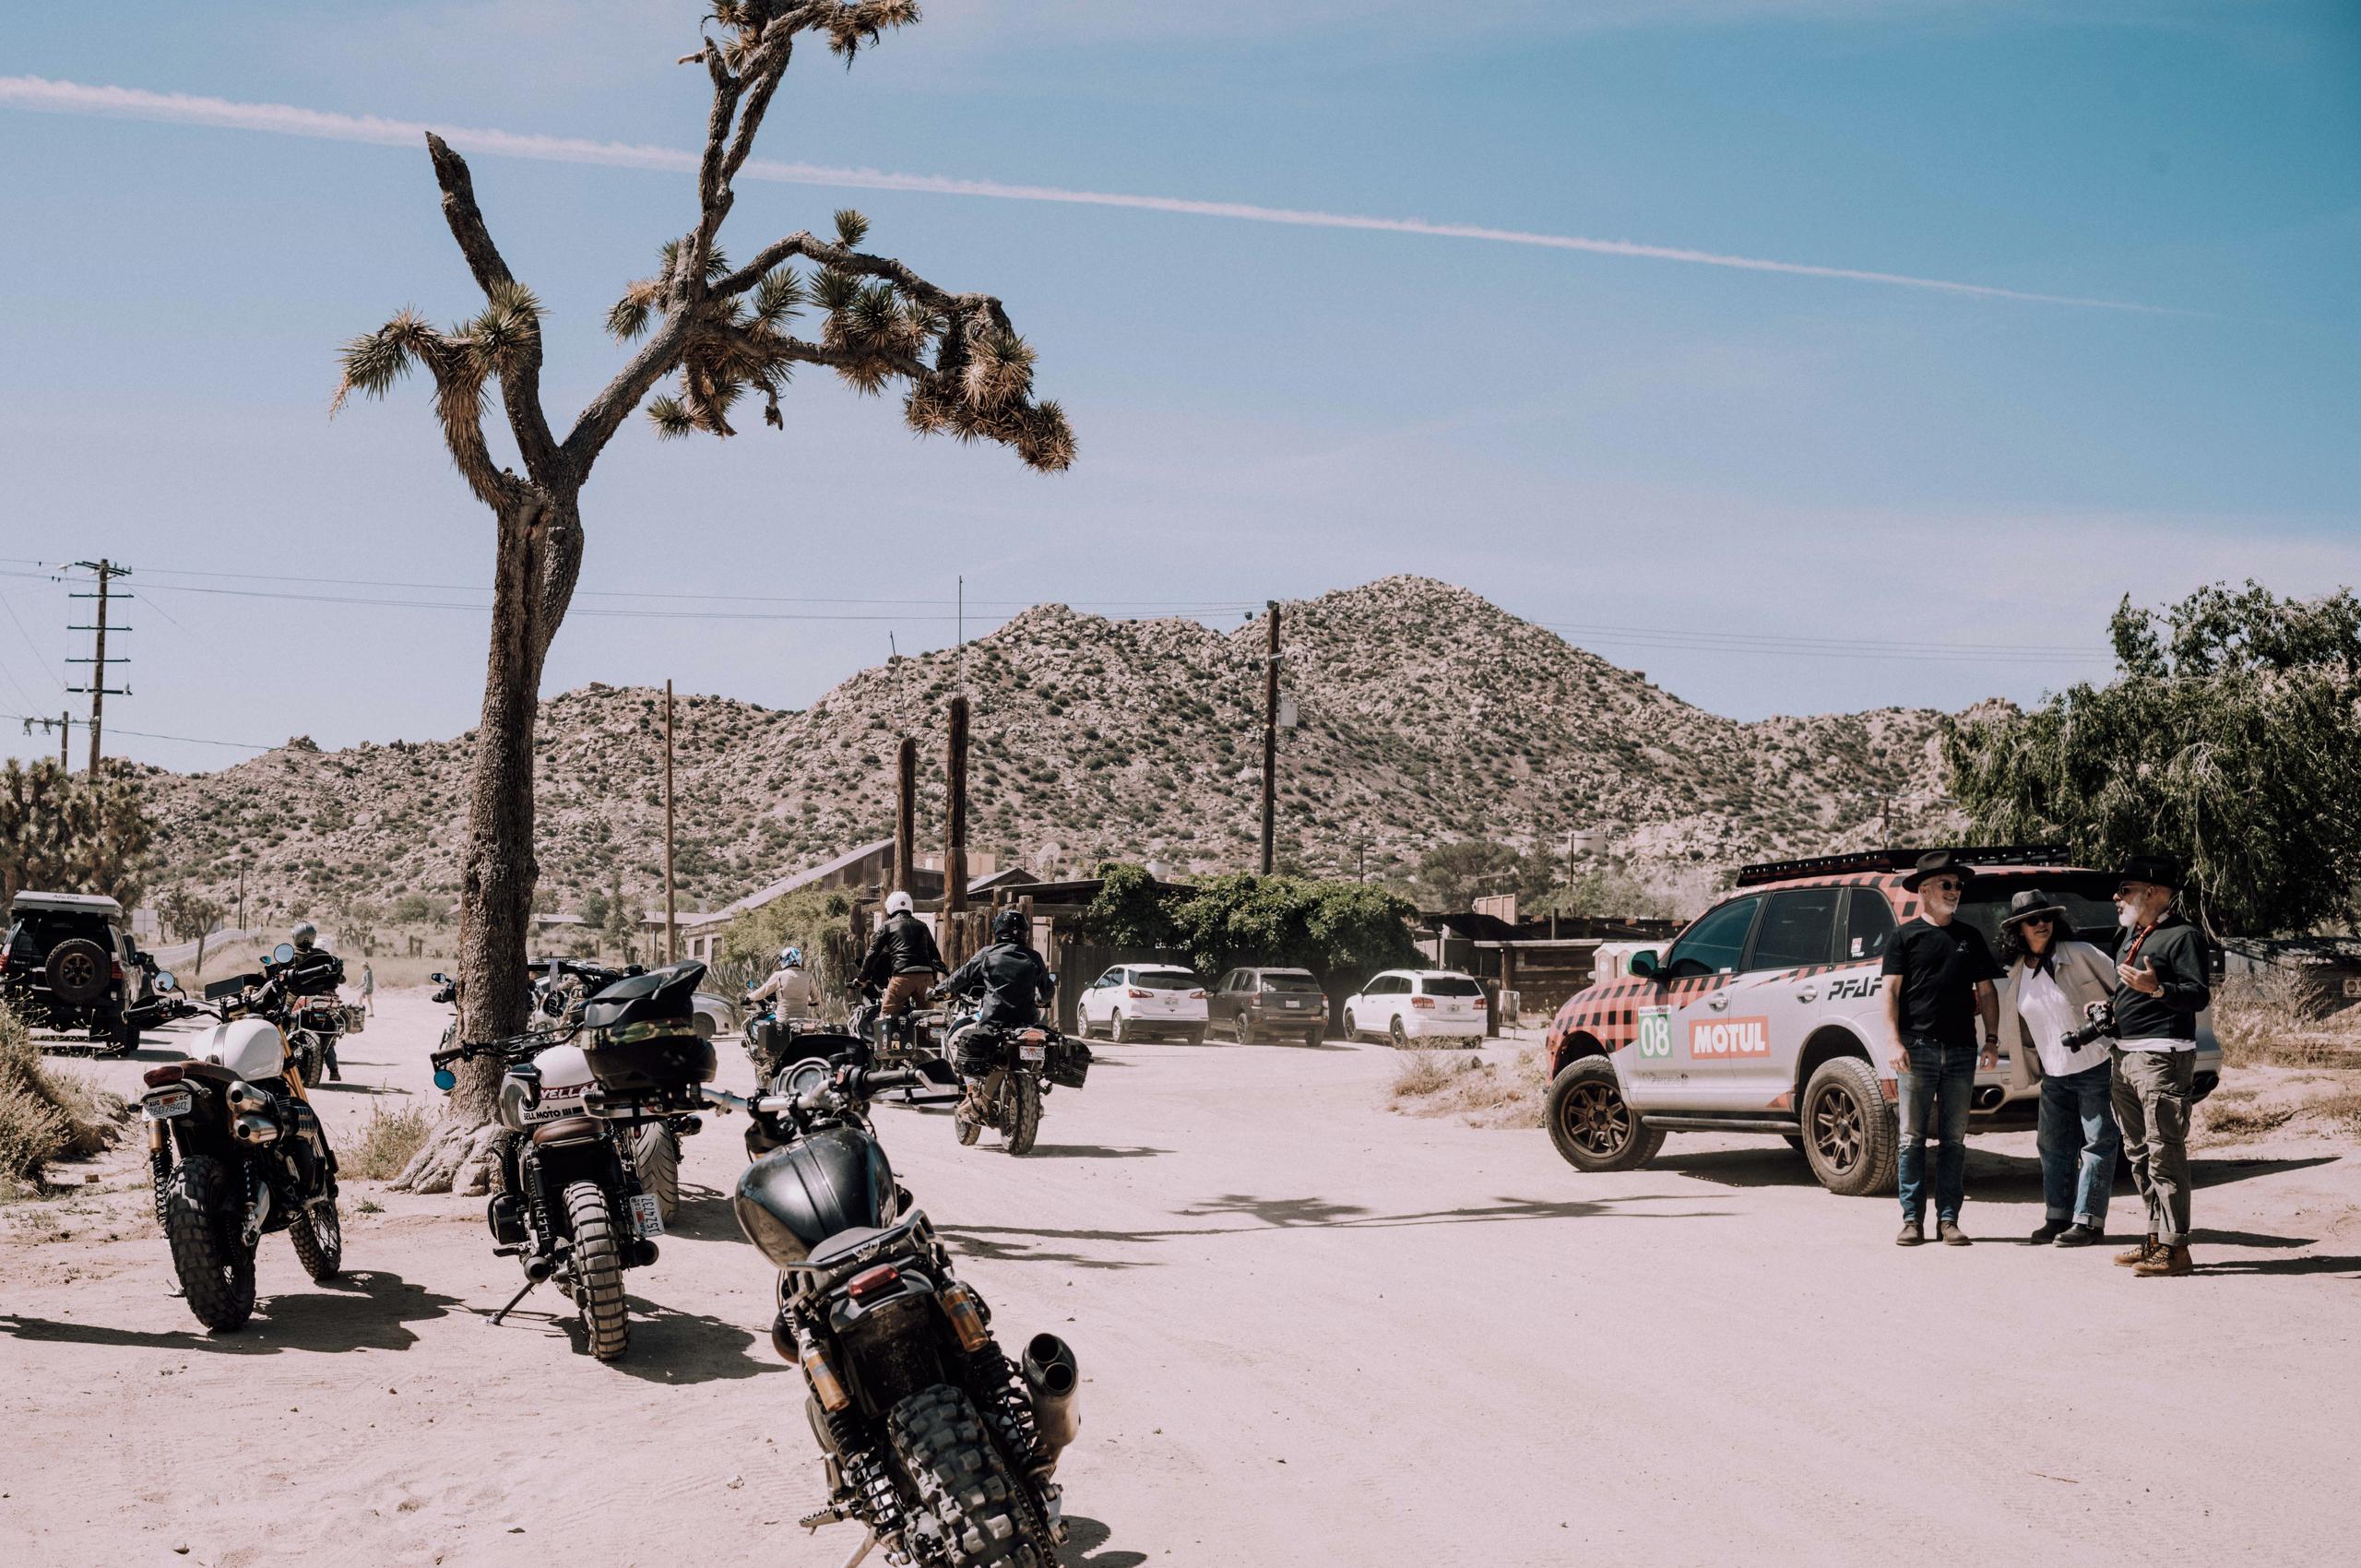 Motorcyclists leaving Pioneertown to Joshua Tree National Park